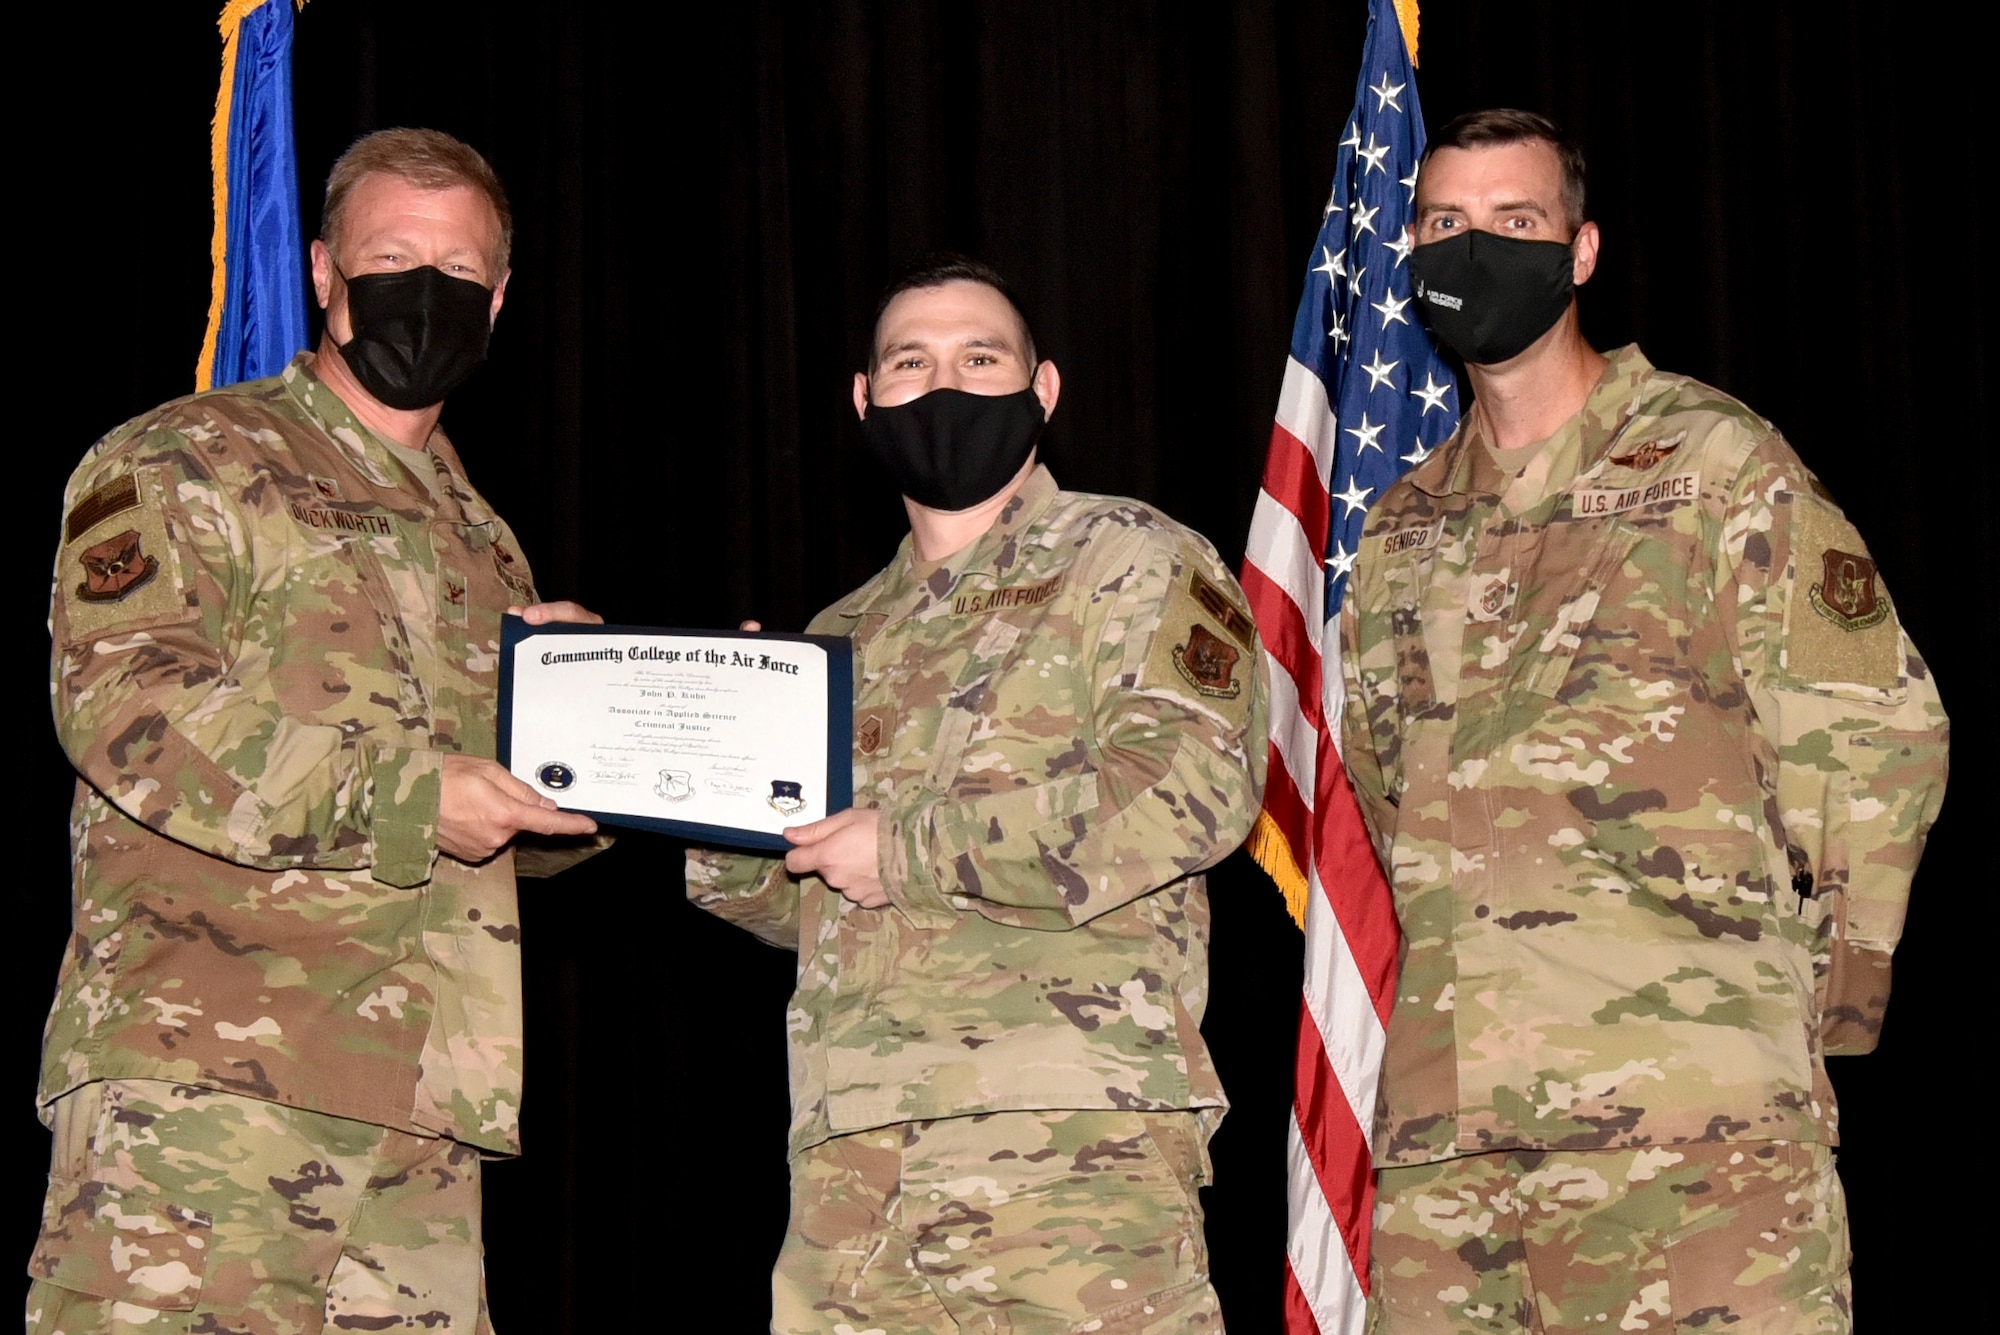 (center) Master Sgt. John Kuhn, 301st Fighter Wing Staff Agency, receives their Community College of the Air Force degree from (left) Col. Allen Duckworth, 301 FW commander, and (right) Chief Master Sgt. Michael Senigo, 301 FW command chief, during a graduation ceremony at U.S. Naval Air Station Joint Reserve Base Fort Worth, Texas, August 7, 2021. The college annually awards over 22,000 associate in applied science degrees from 71 degree programs. (U.S. Air Force photo by Staff Sgt. Randall Moose)